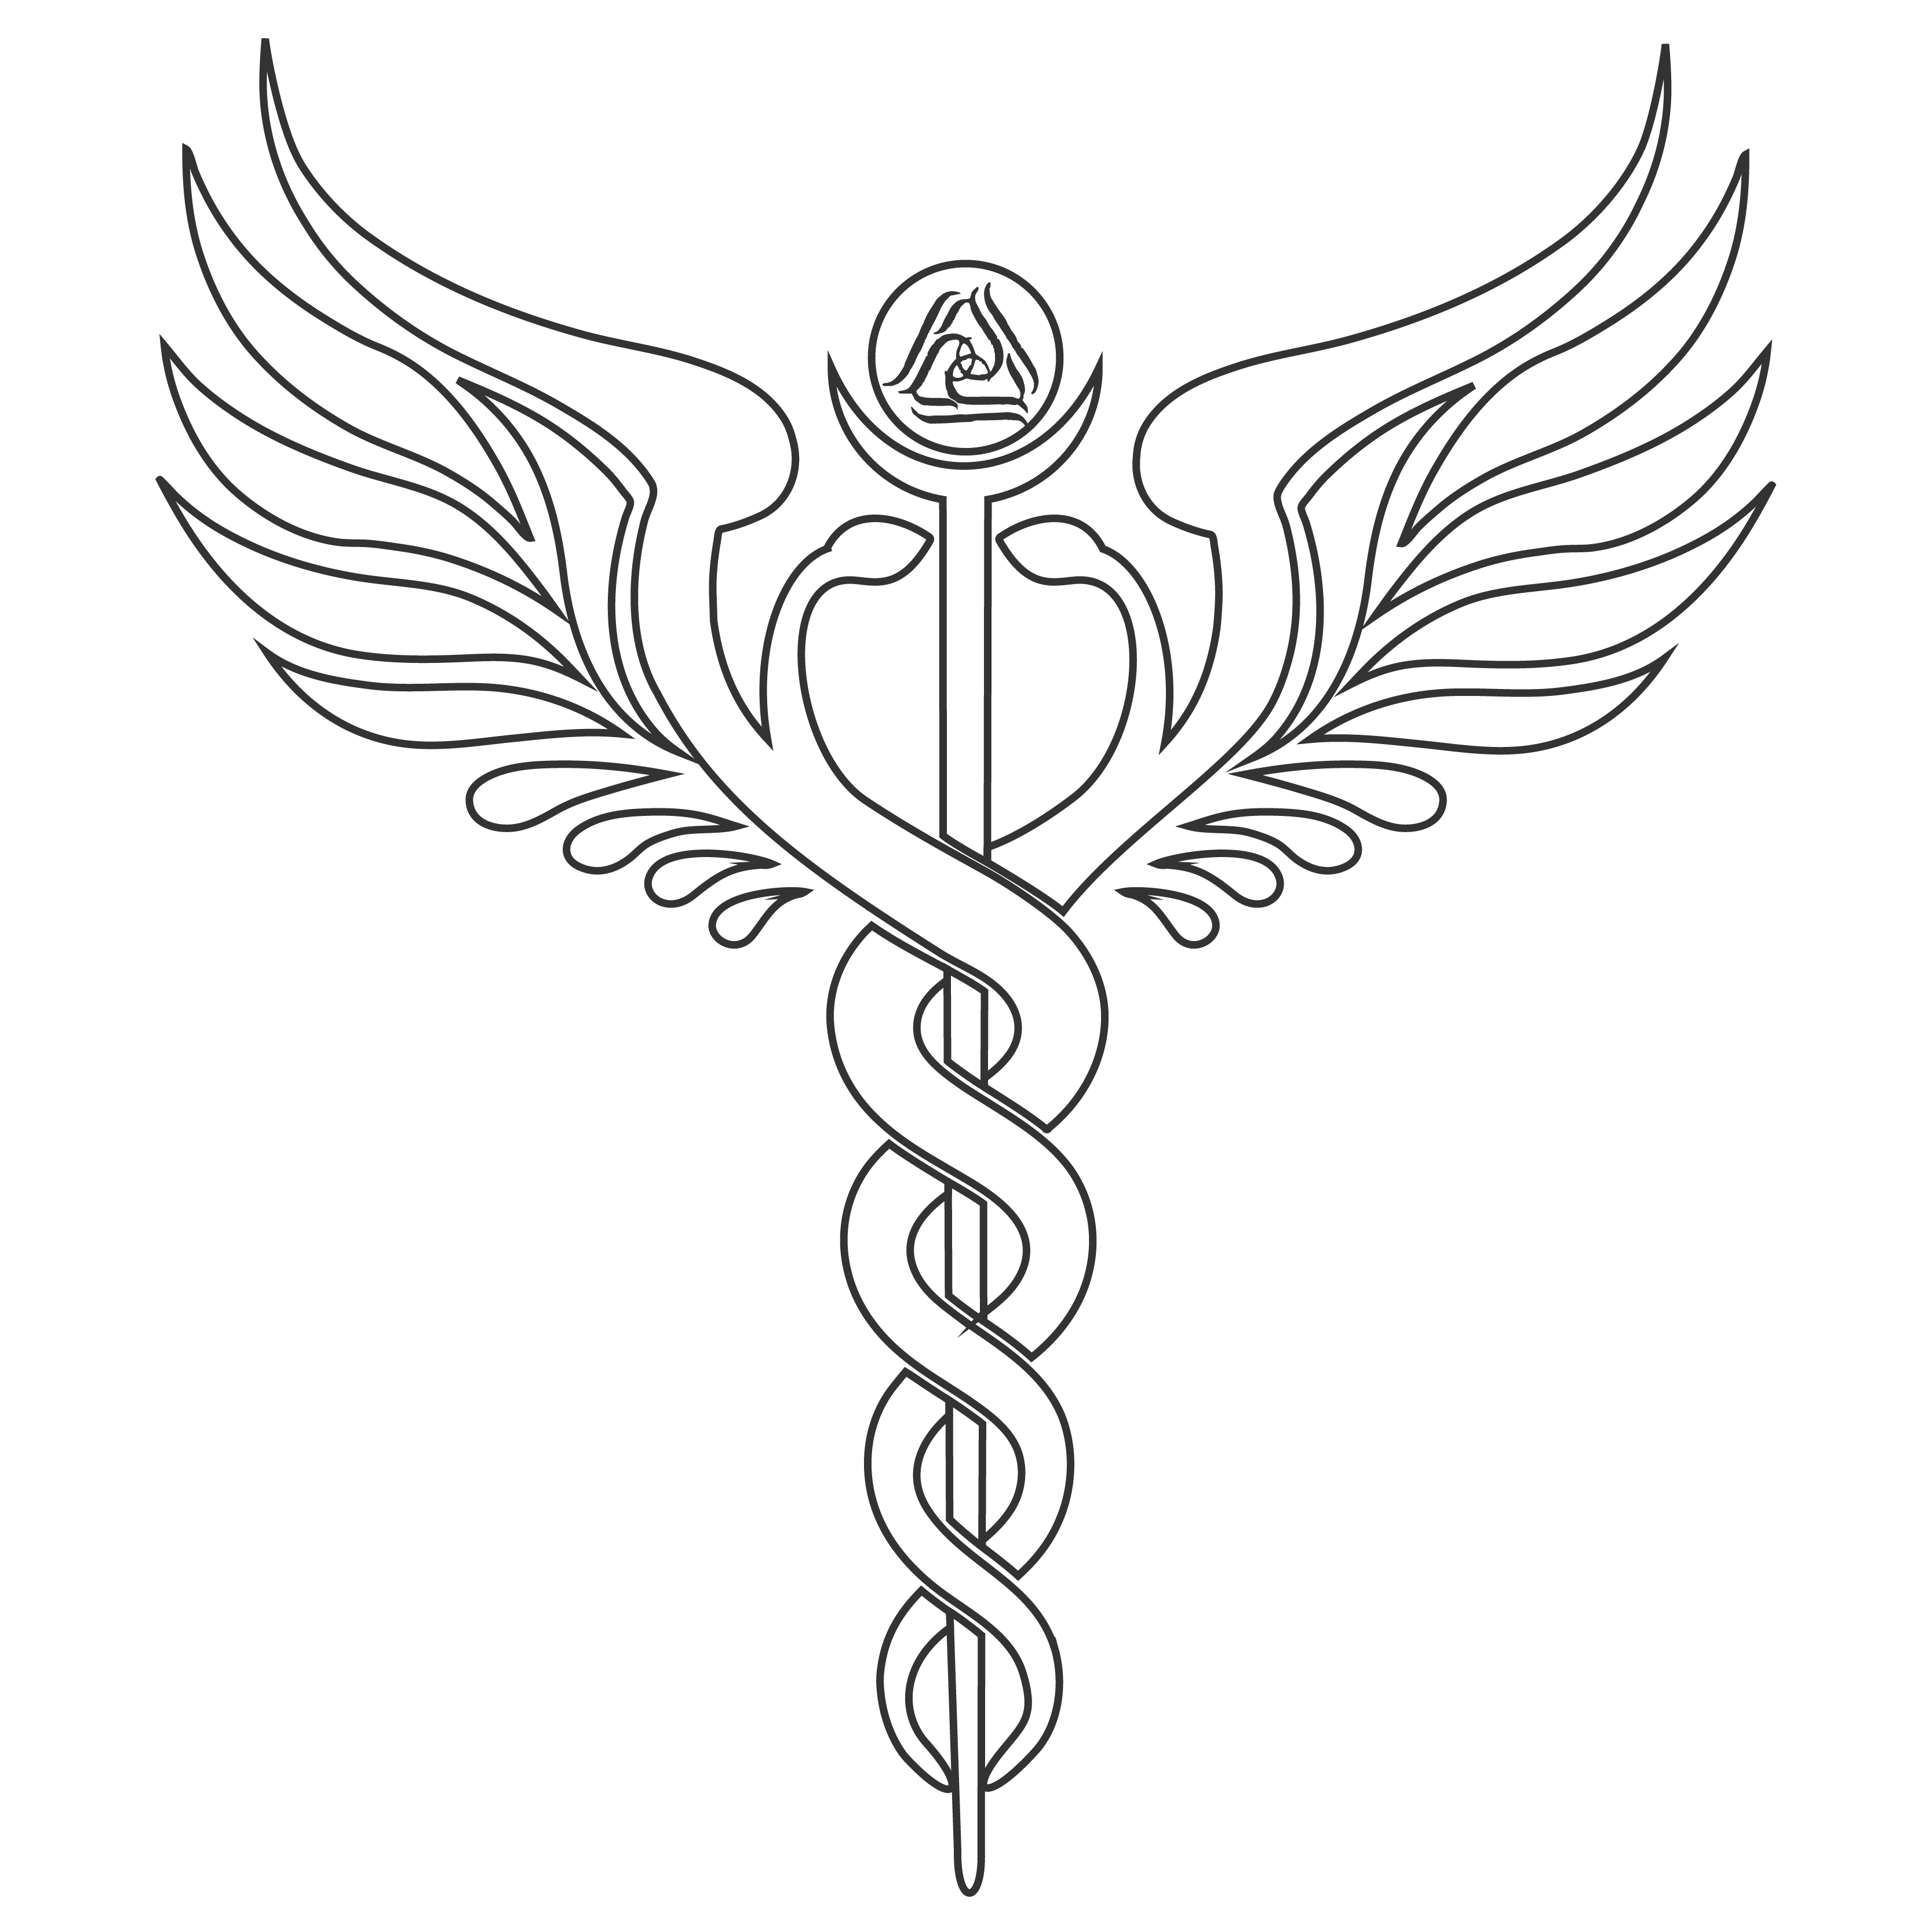 the caduceus depicted on the front cover of conscious connection